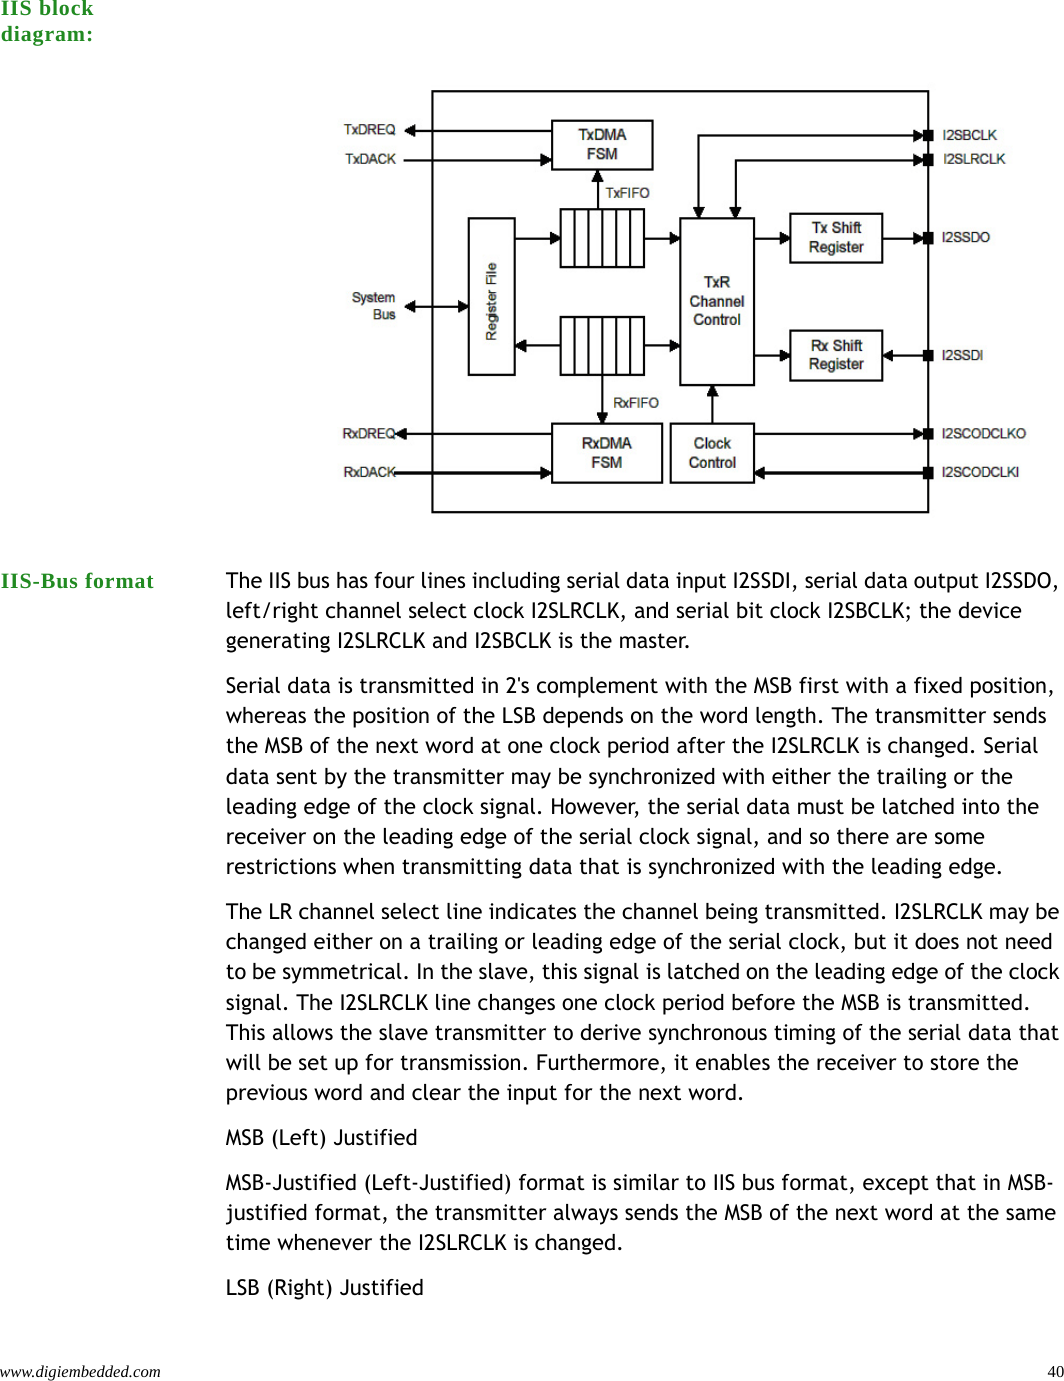 www.digiembedded.com 40IIS block diagram:IIS-Bus format The IIS bus has four lines including serial data input I2SSDI, serial data output I2SSDO, left/right channel select clock I2SLRCLK, and serial bit clock I2SBCLK; the device generating I2SLRCLK and I2SBCLK is the master.Serial data is transmitted in 2&apos;s complement with the MSB first with a fixed position, whereas the position of the LSB depends on the word length. The transmitter sends the MSB of the next word at one clock period after the I2SLRCLK is changed. Serial data sent by the transmitter may be synchronized with either the trailing or the leading edge of the clock signal. However, the serial data must be latched into the receiver on the leading edge of the serial clock signal, and so there are some restrictions when transmitting data that is synchronized with the leading edge.The LR channel select line indicates the channel being transmitted. I2SLRCLK may be changed either on a trailing or leading edge of the serial clock, but it does not need to be symmetrical. In the slave, this signal is latched on the leading edge of the clock signal. The I2SLRCLK line changes one clock period before the MSB is transmitted. This allows the slave transmitter to derive synchronous timing of the serial data that will be set up for transmission. Furthermore, it enables the receiver to store the previous word and clear the input for the next word.MSB (Left) JustifiedMSB-Justified (Left-Justified) format is similar to IIS bus format, except that in MSB-justified format, the transmitter always sends the MSB of the next word at the same time whenever the I2SLRCLK is changed.LSB (Right) Justified